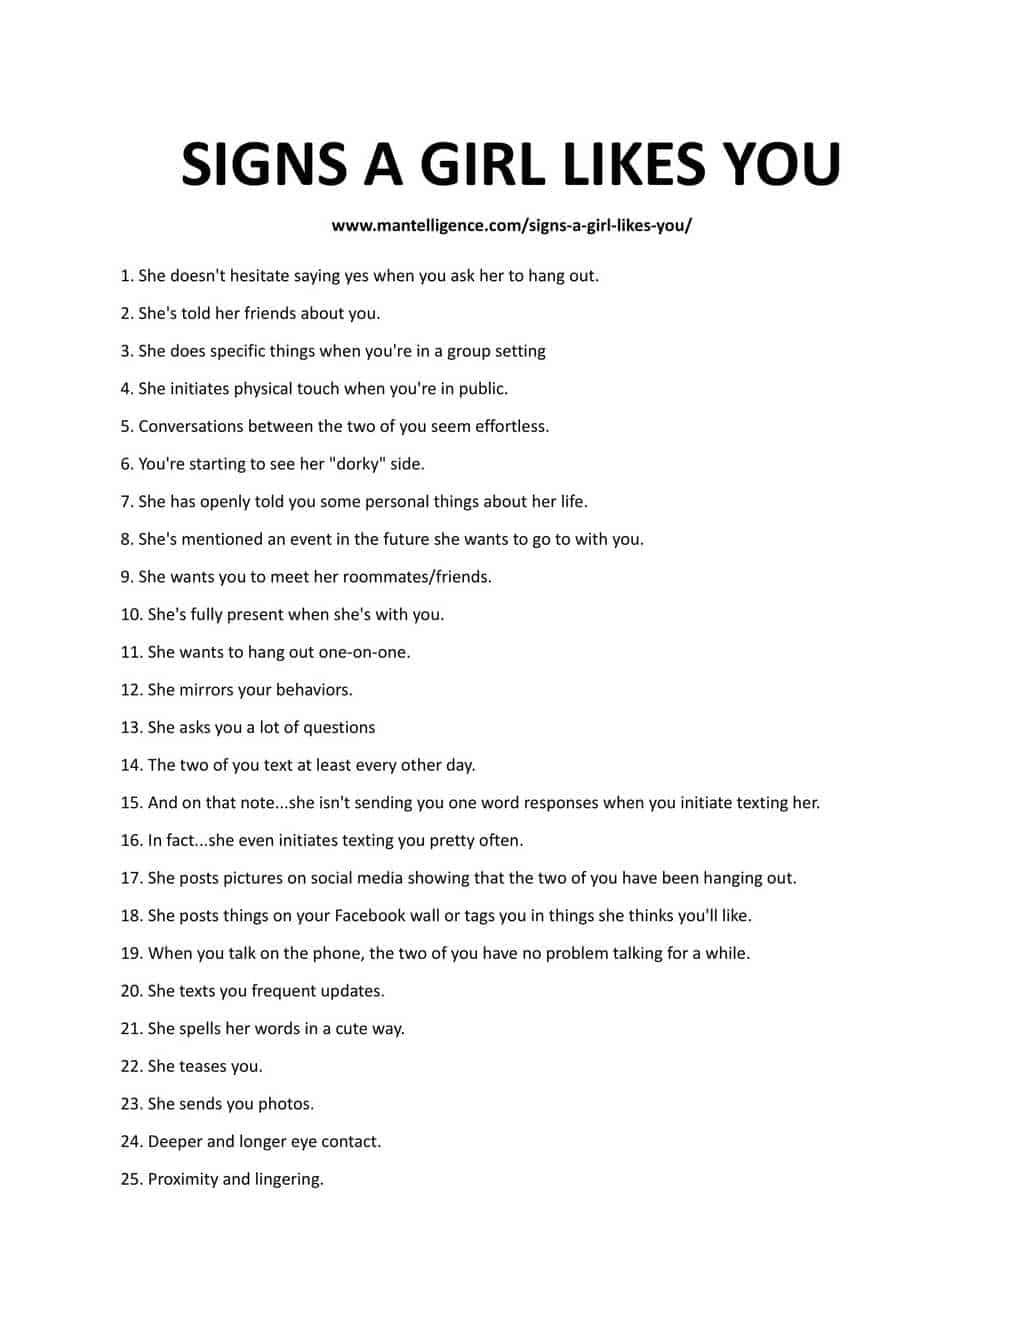 Signs a girl gives when she likes you